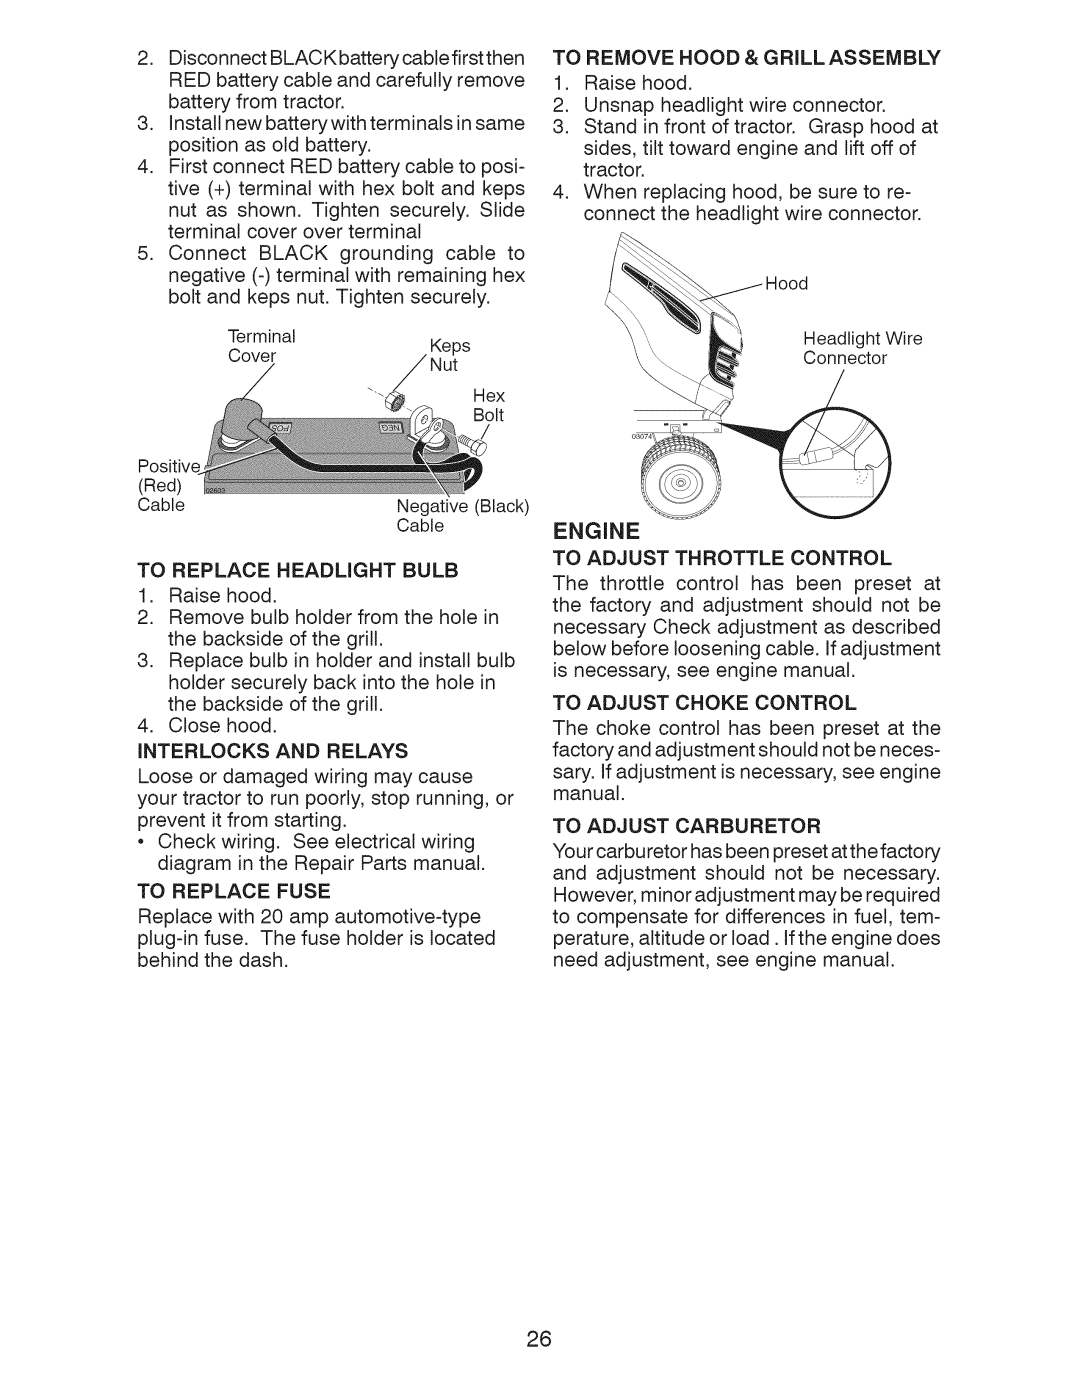 Craftsman 917.28922 owner manual To Replace Headlight Bulb, Interlocks And Relays, To Remove Hood & Grill Assembly 